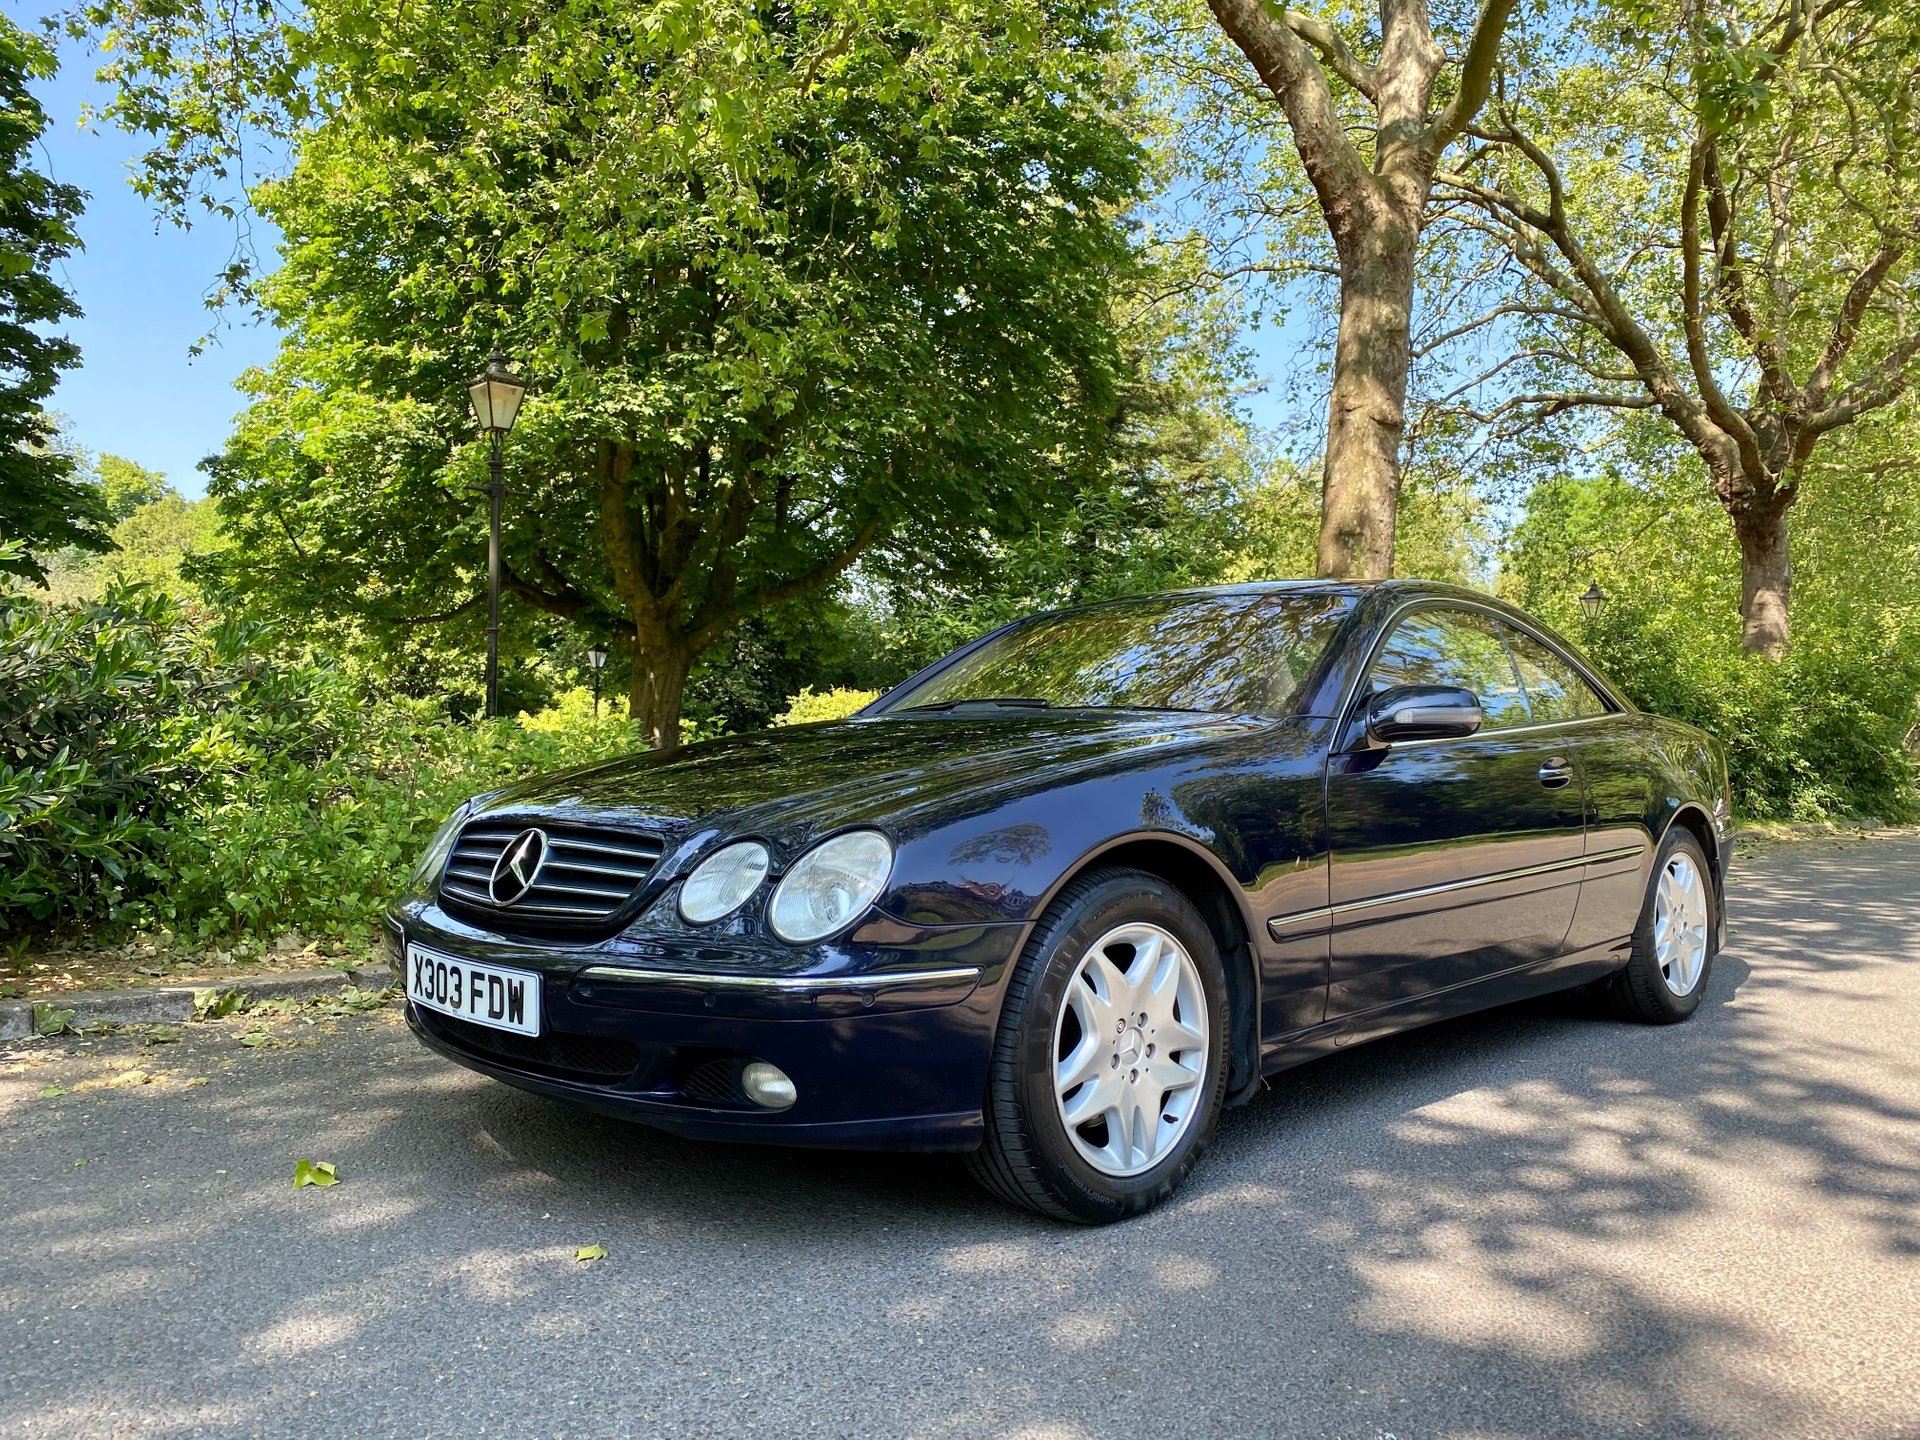 Mercedes benz cl500 9udocbg3wwmephpvvplpw